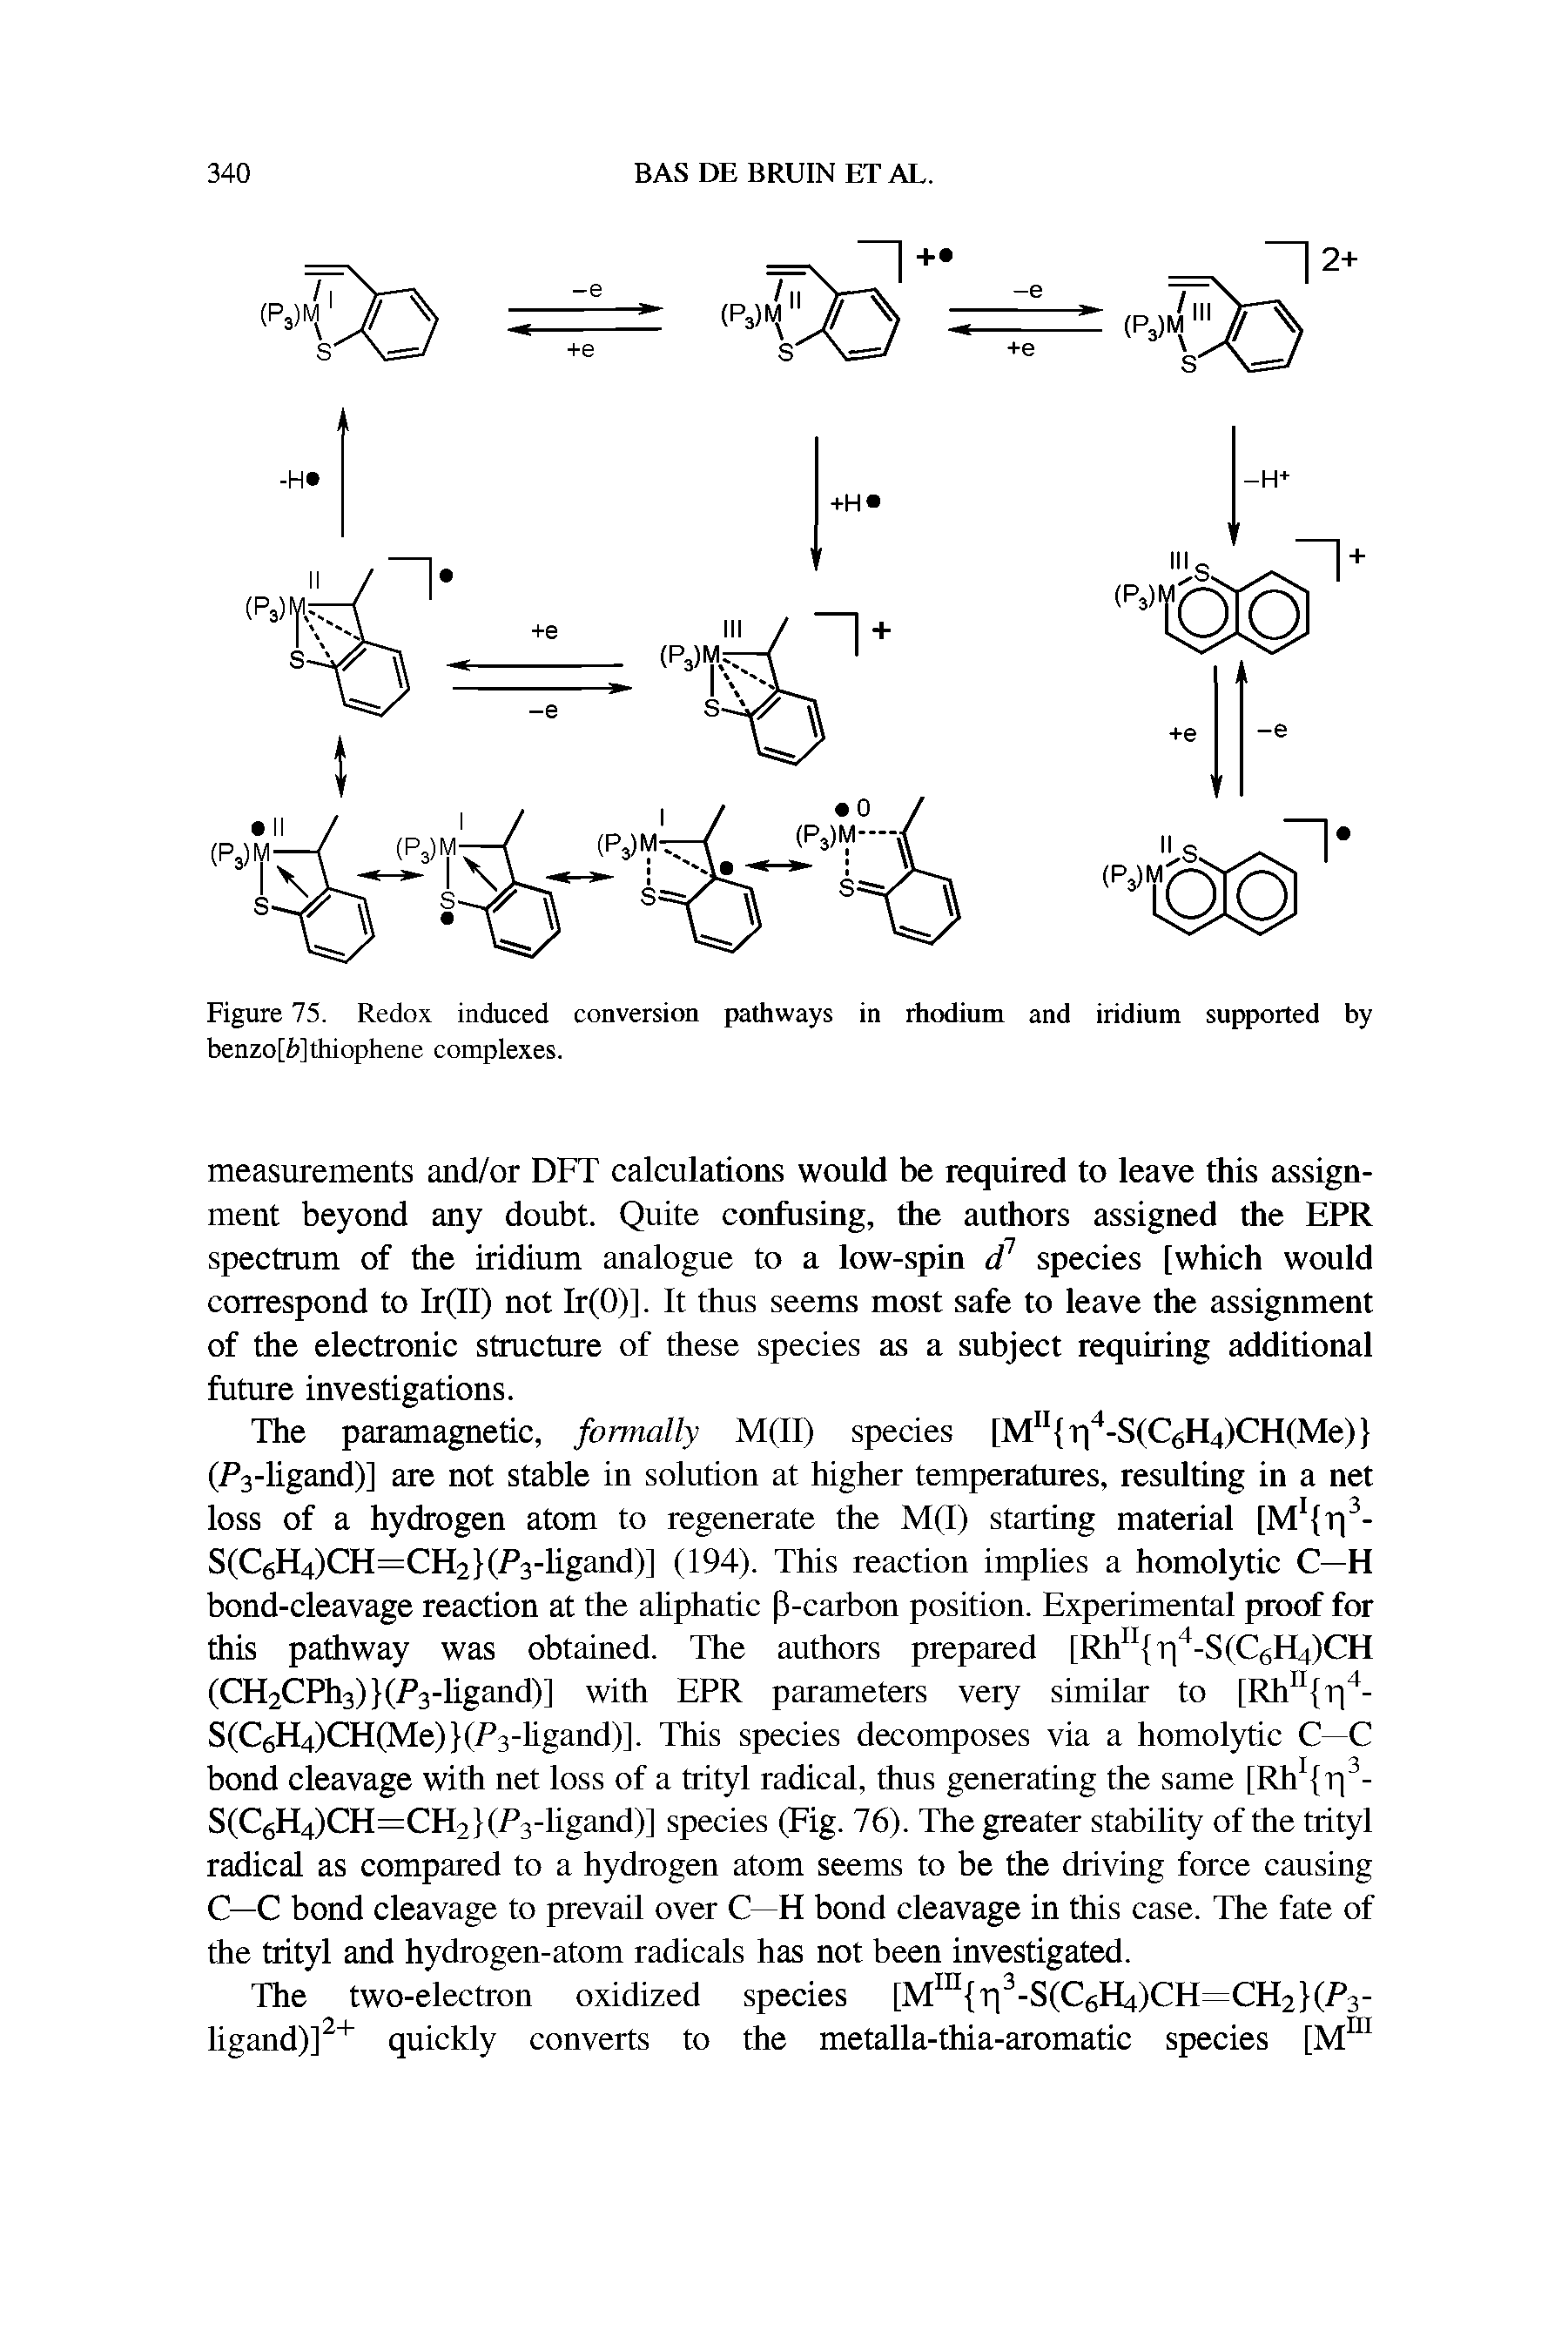 Figure 75. Redox induced conversion pathways in rhodium and iridium supported by benzo[i>]thiophene complexes.